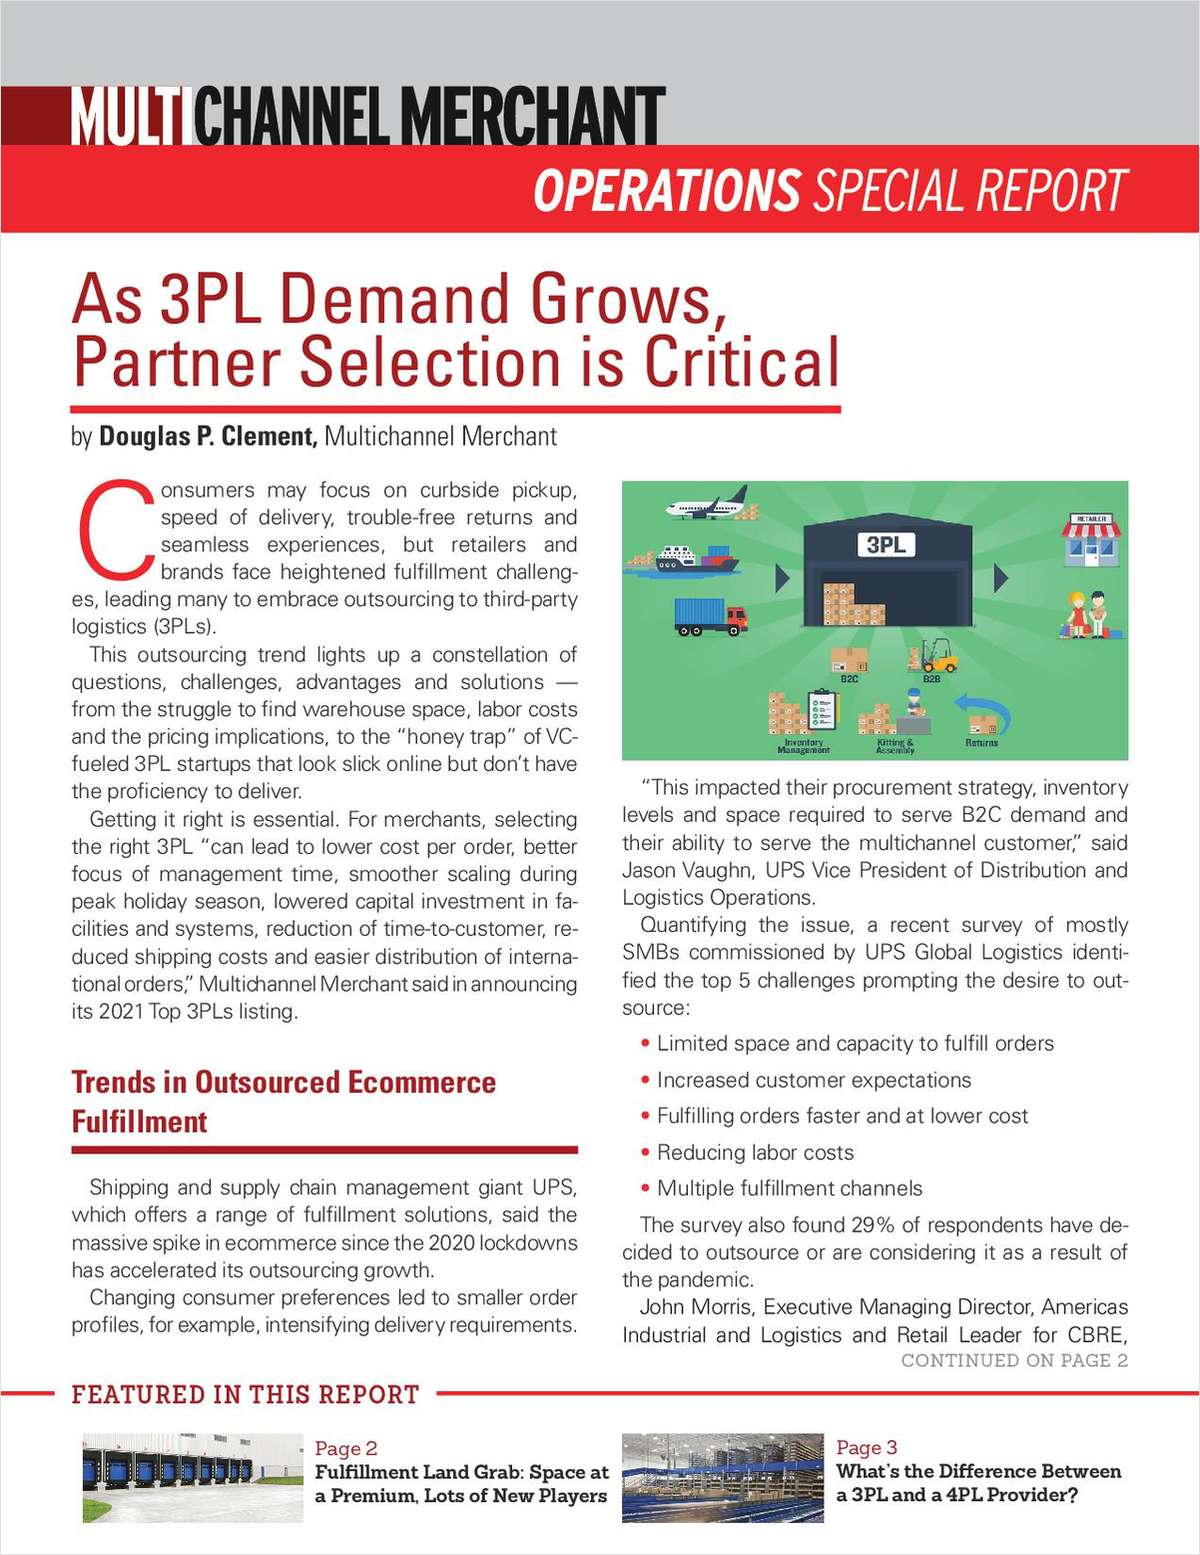 As 3PL Demand Grows, Partner Selection is Critical